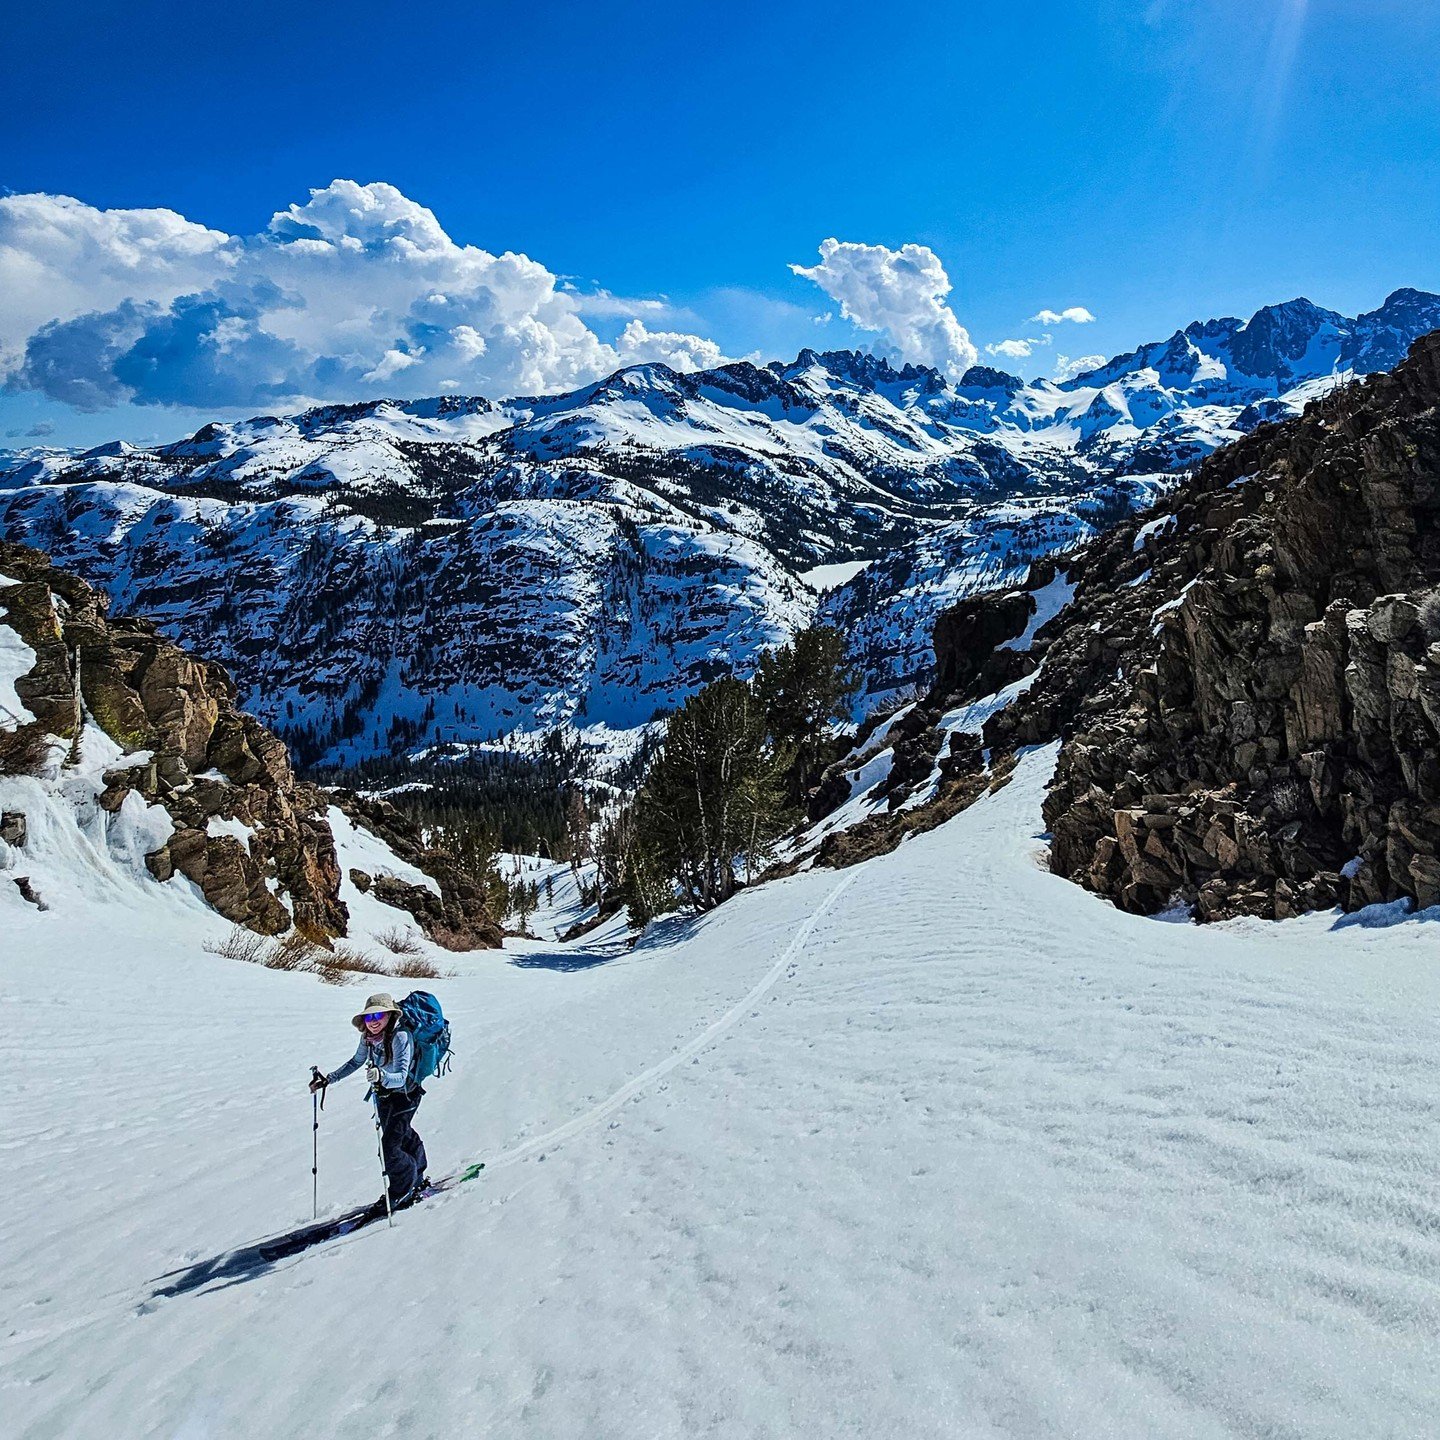 We are in the midst of a fantastic Sierra Spring ski touring season! A great snowpack and stellar weather have made for some great tours and corn harvesting. Here's a shot of our Mammoth to June Lake ski tour this weekend. #mammothtojune #springskiin